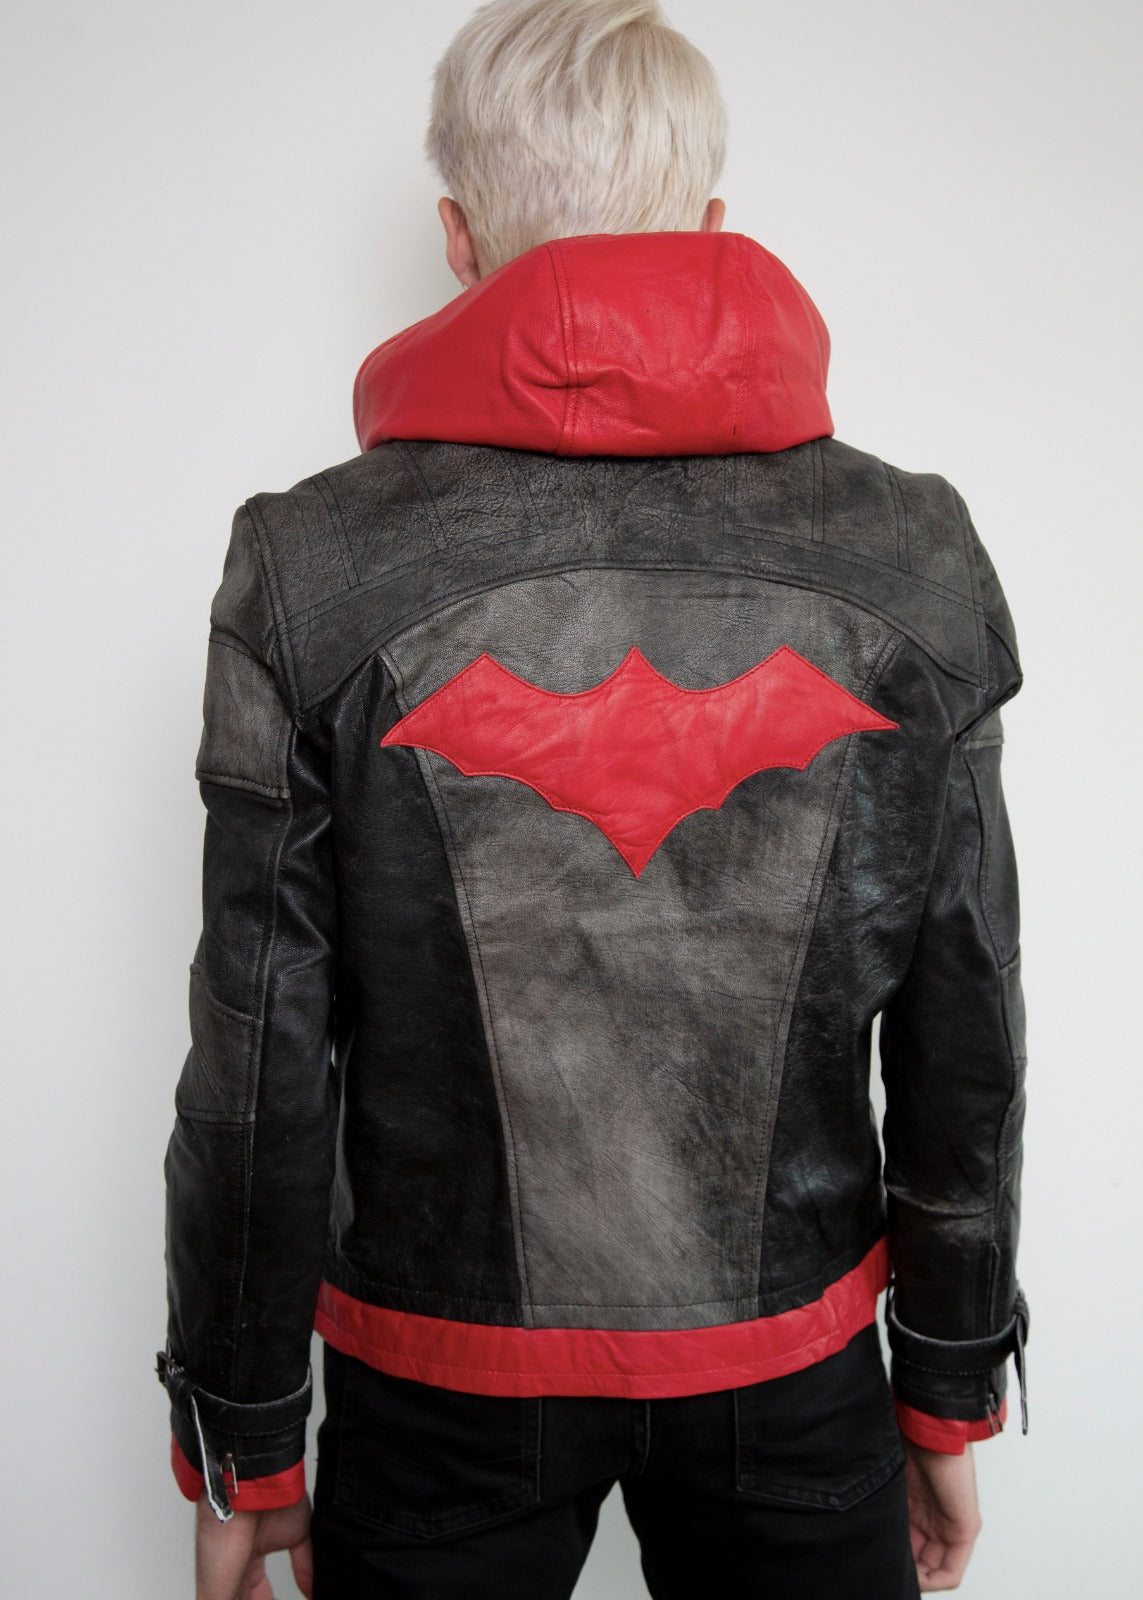 Buy Mens Arkham Knight Red Hood Leather Jacket | LucaJackets – Luca Designs